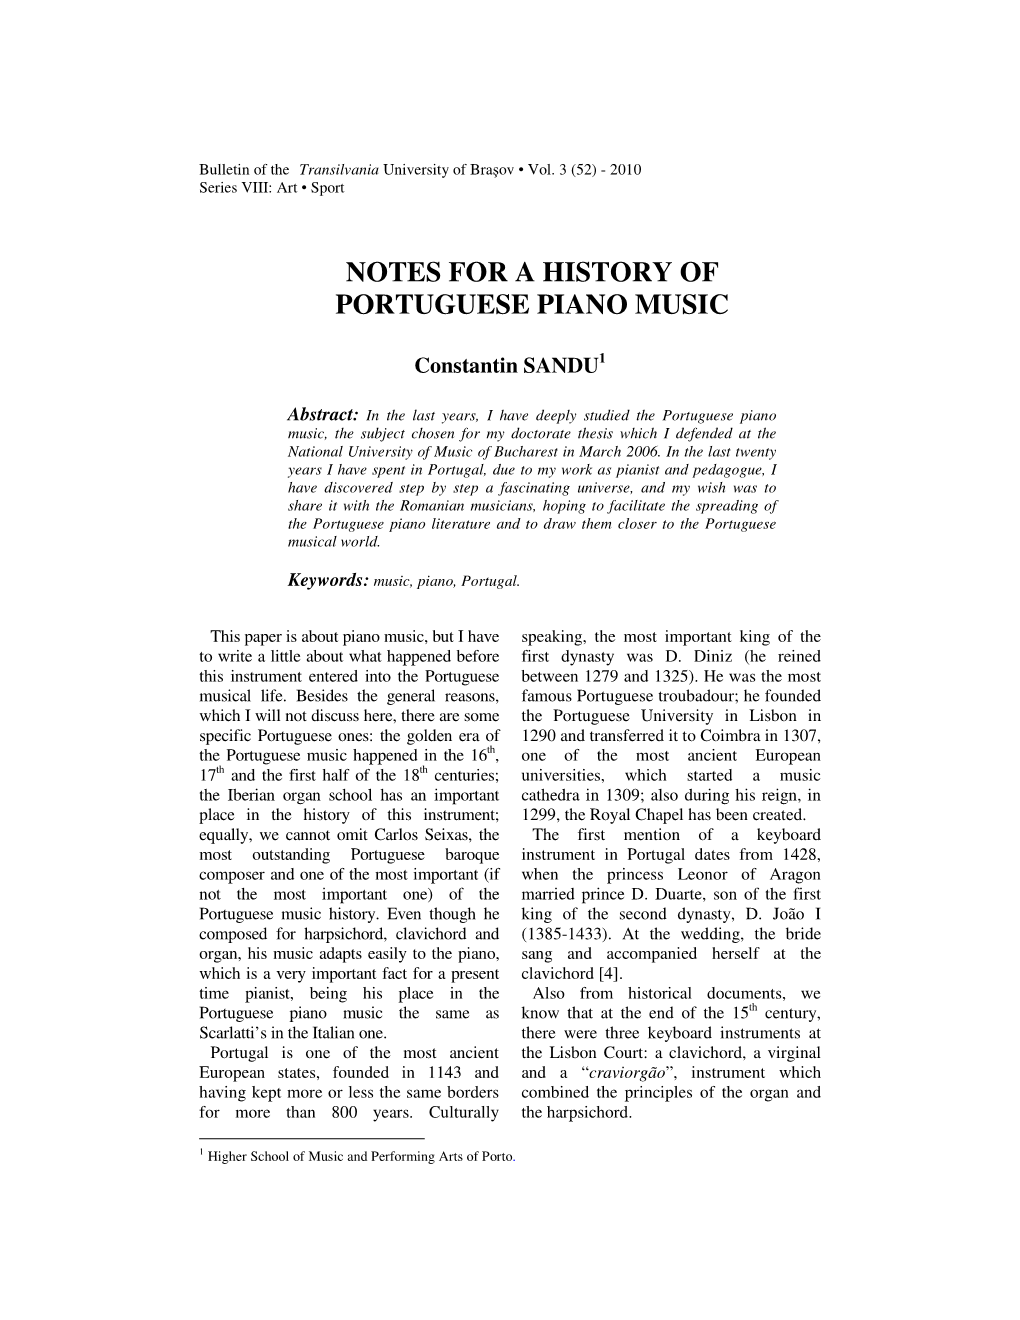 Sandu, C.: Notes for a History of Portuguese Piano Music